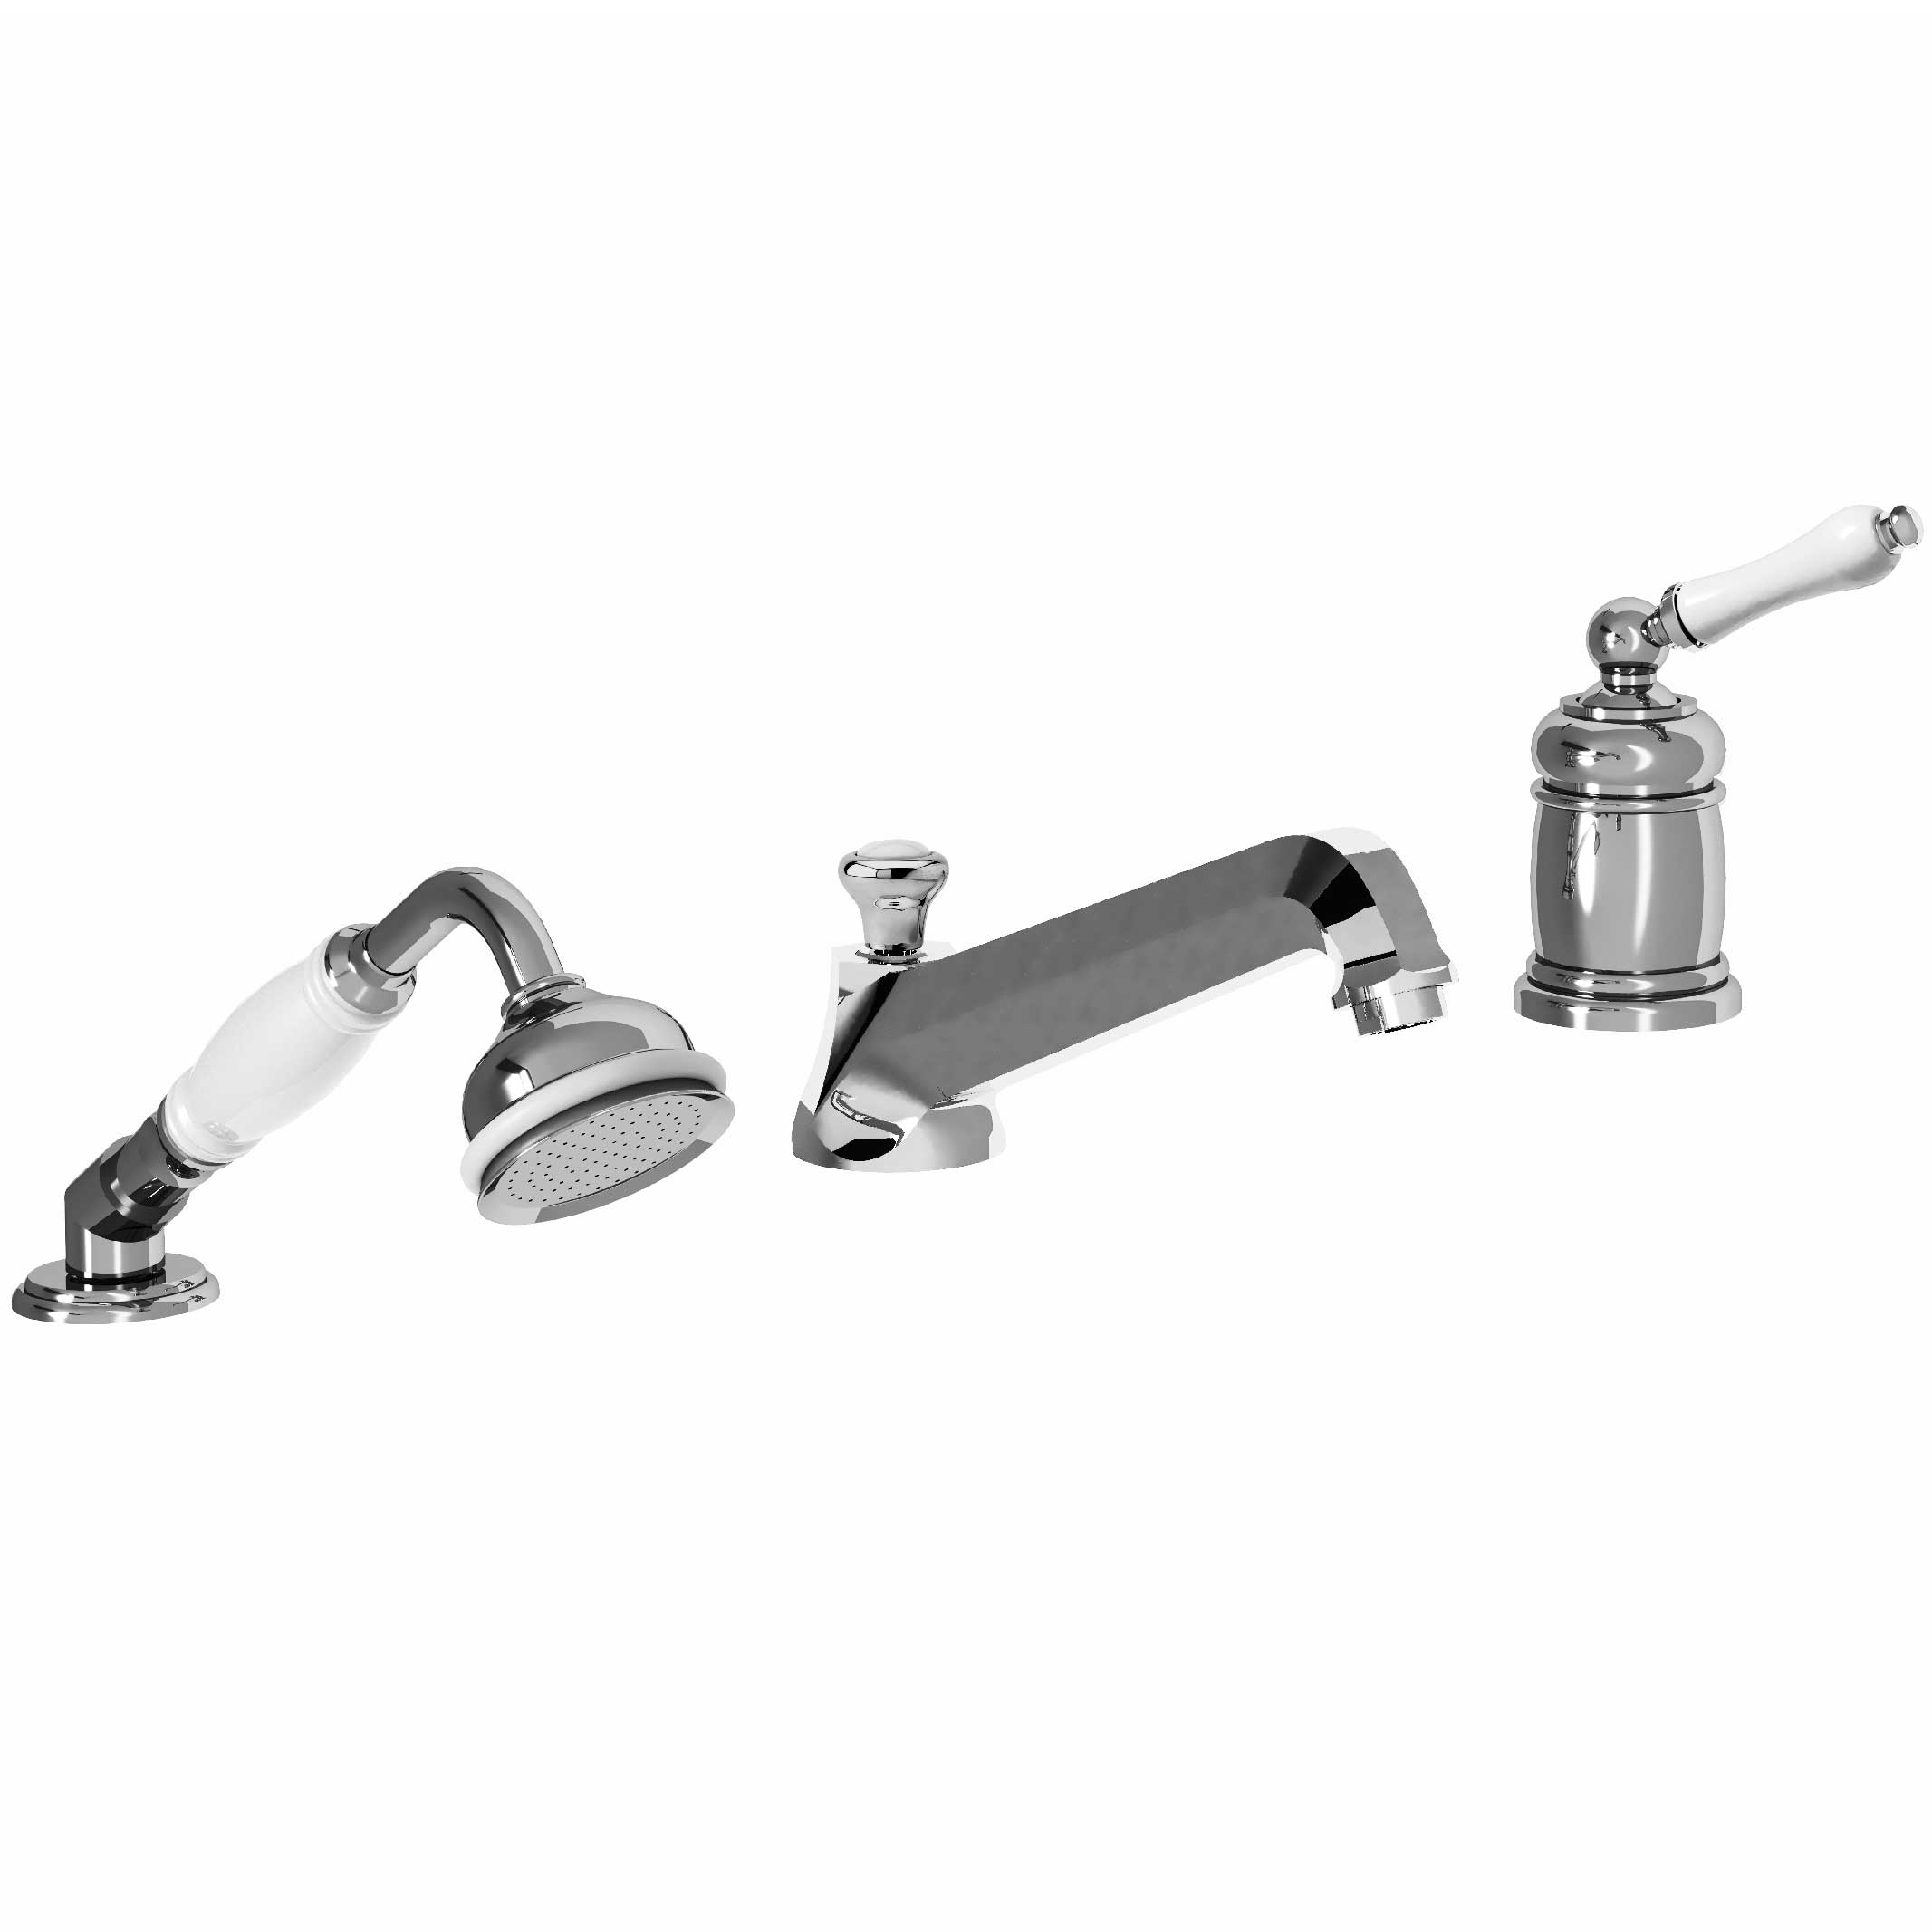 M32-3301M 3-hole single-lever bath and shower mixer